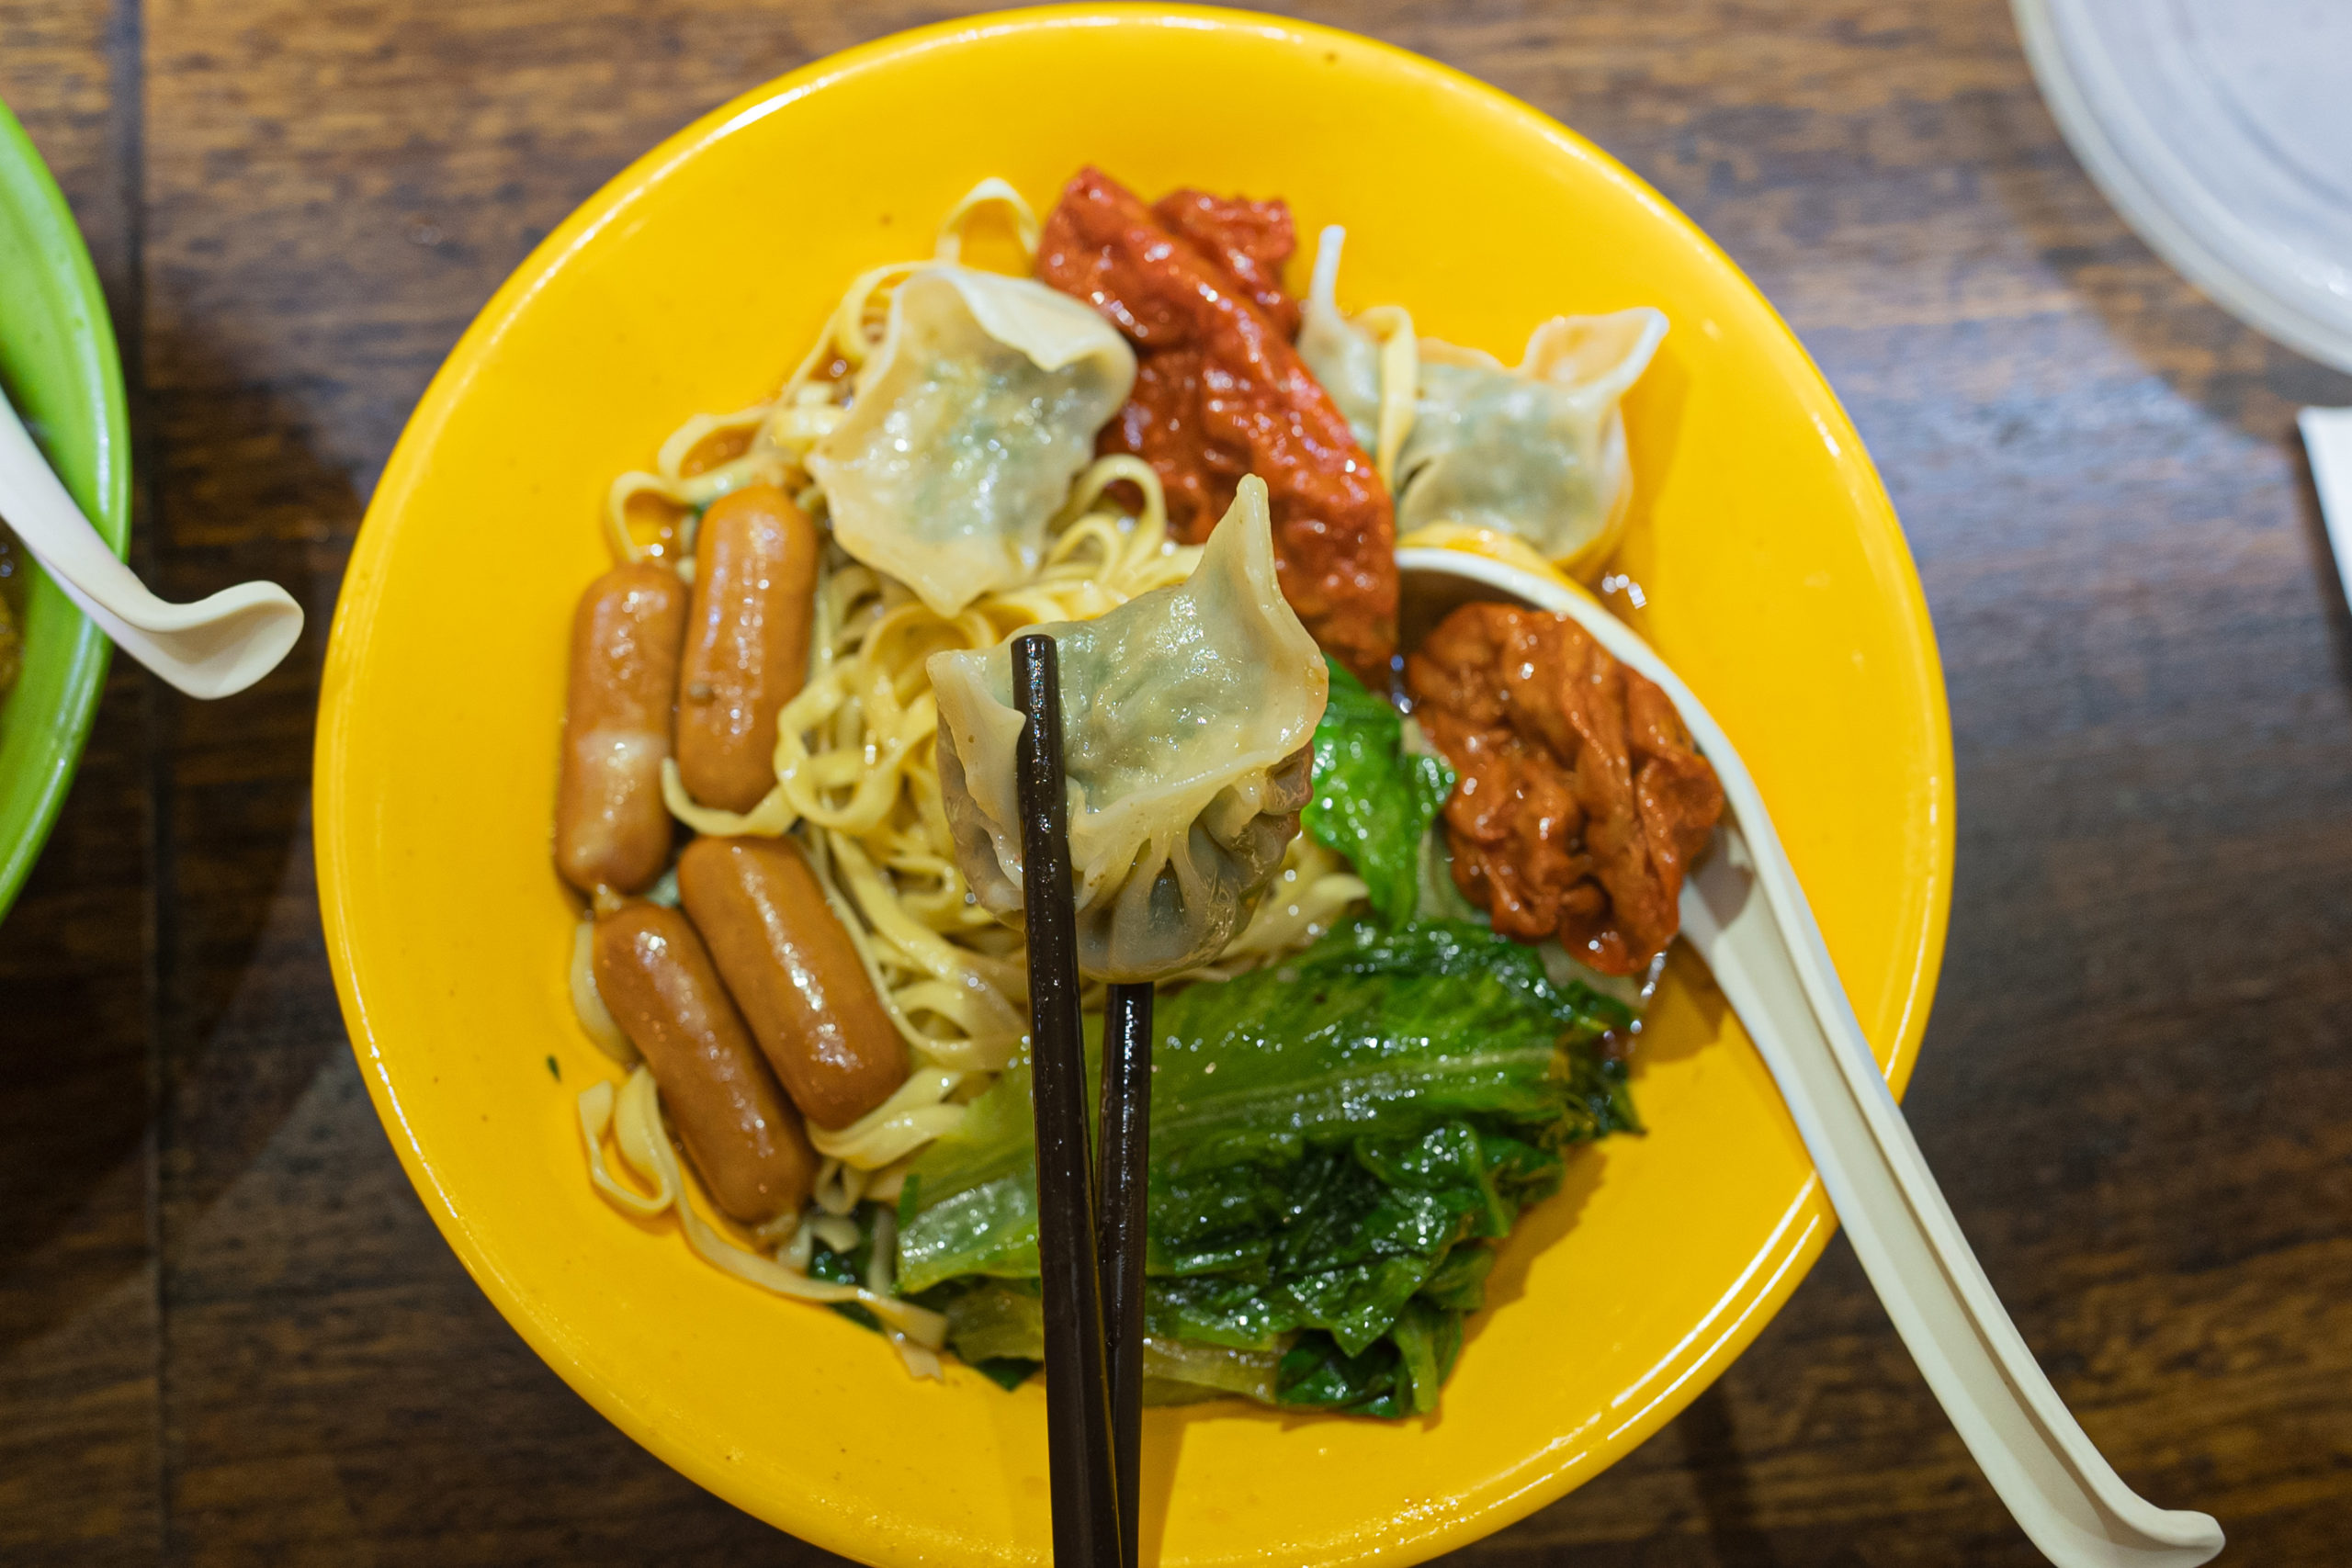 Anything can go on a bowl of Cart Noodle - dumplings, sausages, vegetables, sour wheat gluten. How about yours?